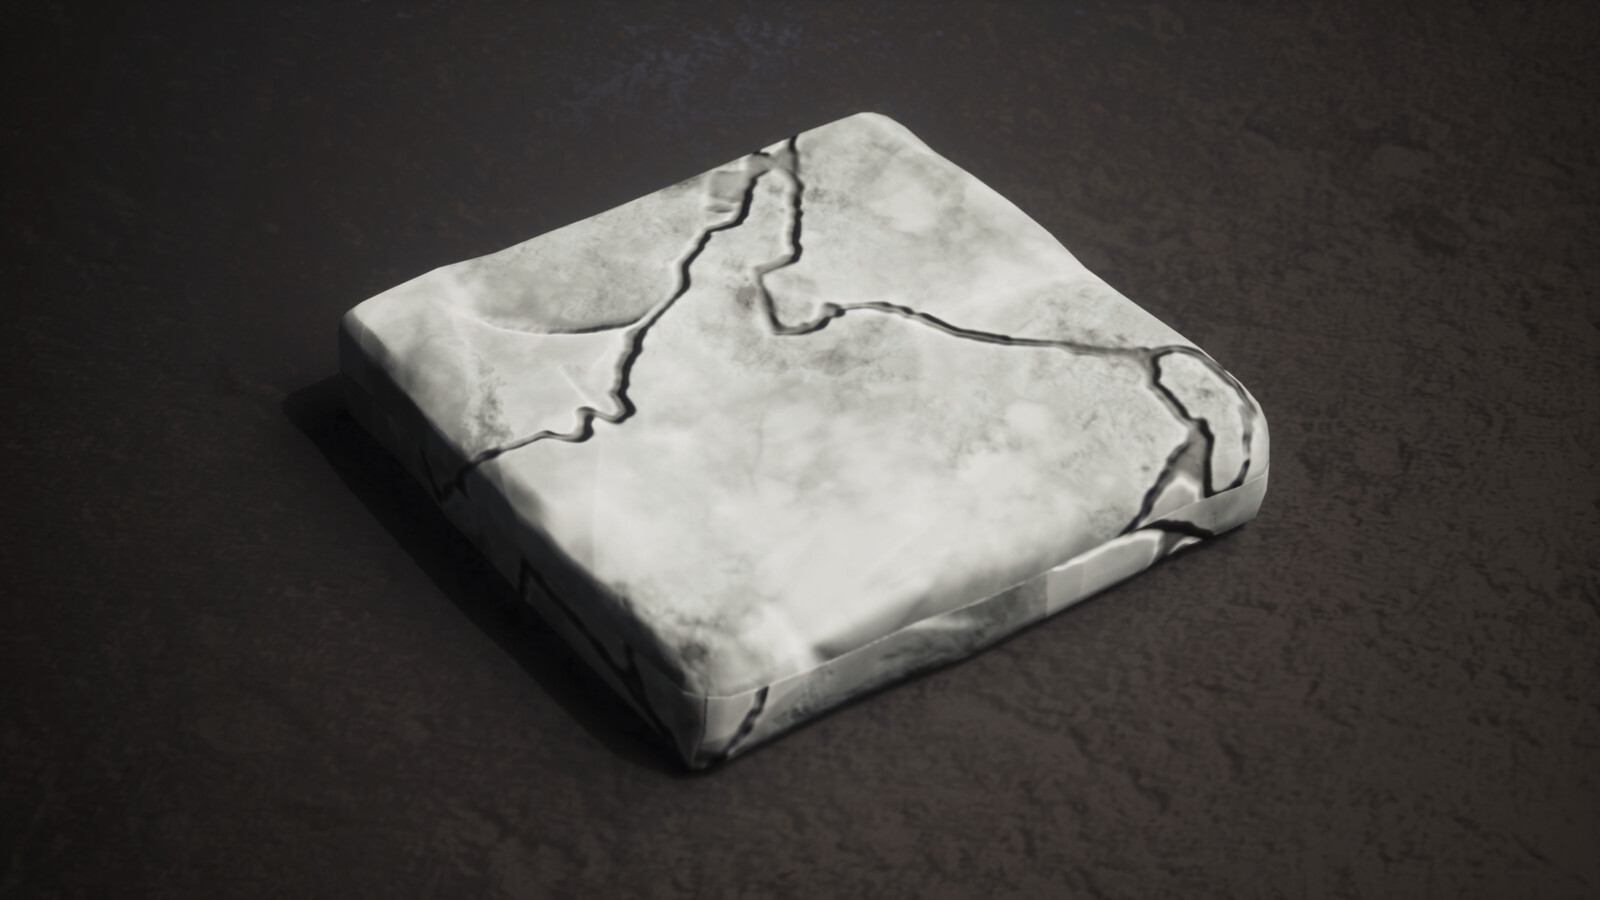 The floor tile has cracks due to age and is crumbling after the player leaves the tile, so he has to choose carelly where he goes to solve puzzles.